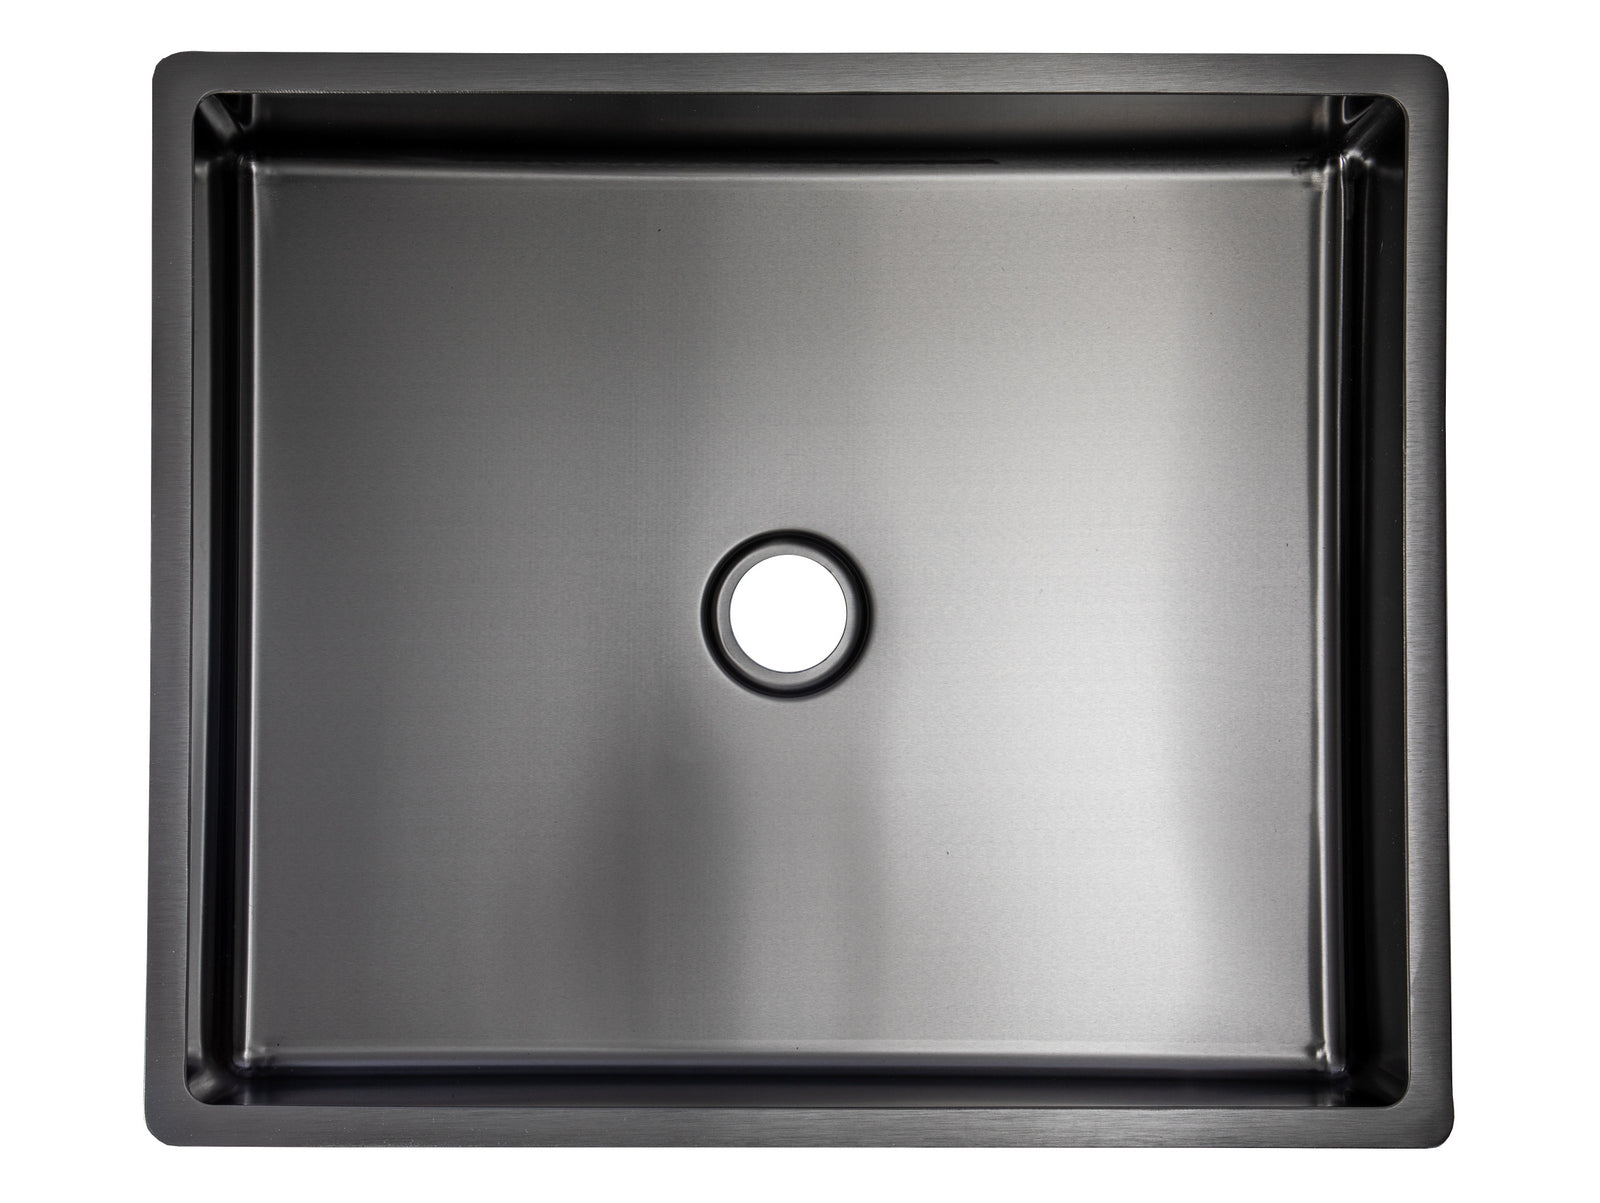 Rectangular 18 3/4 x 15 3/4" Thick Rim Stainless Steel Bathroom Vessel Sink with Drain in Black